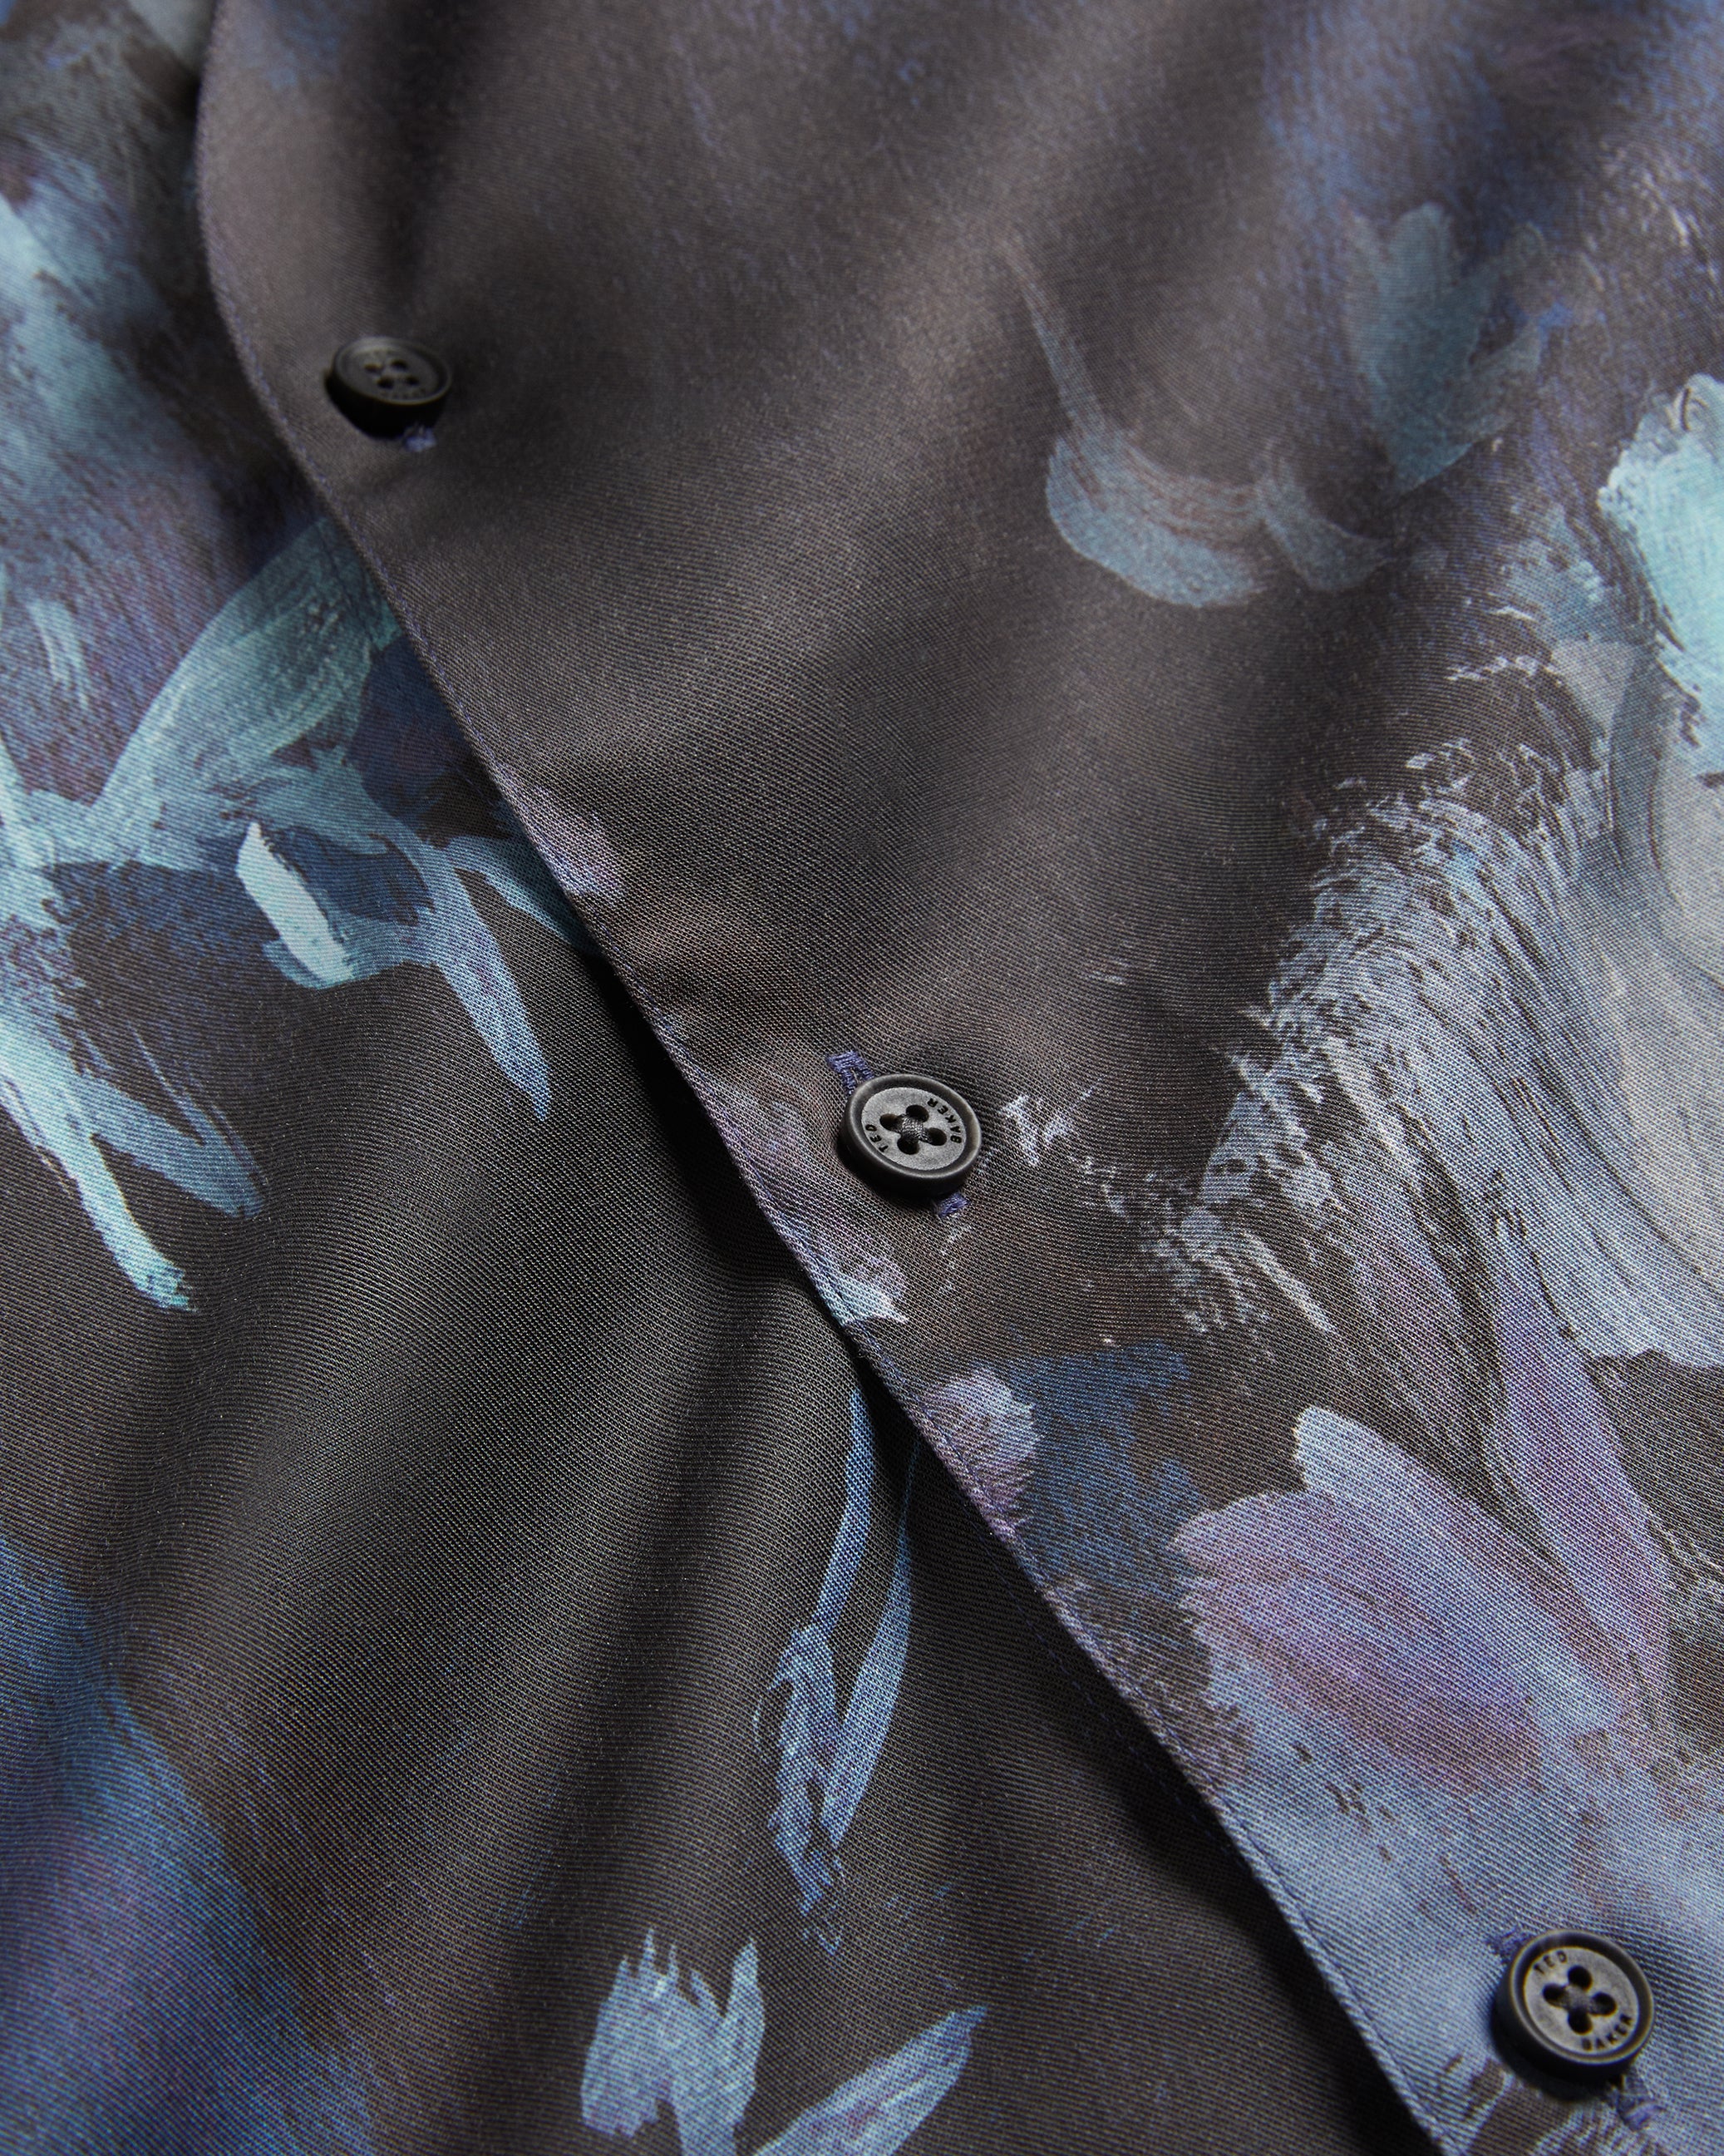 Renmo Ls Abstract Painted Floral Shirt Navy